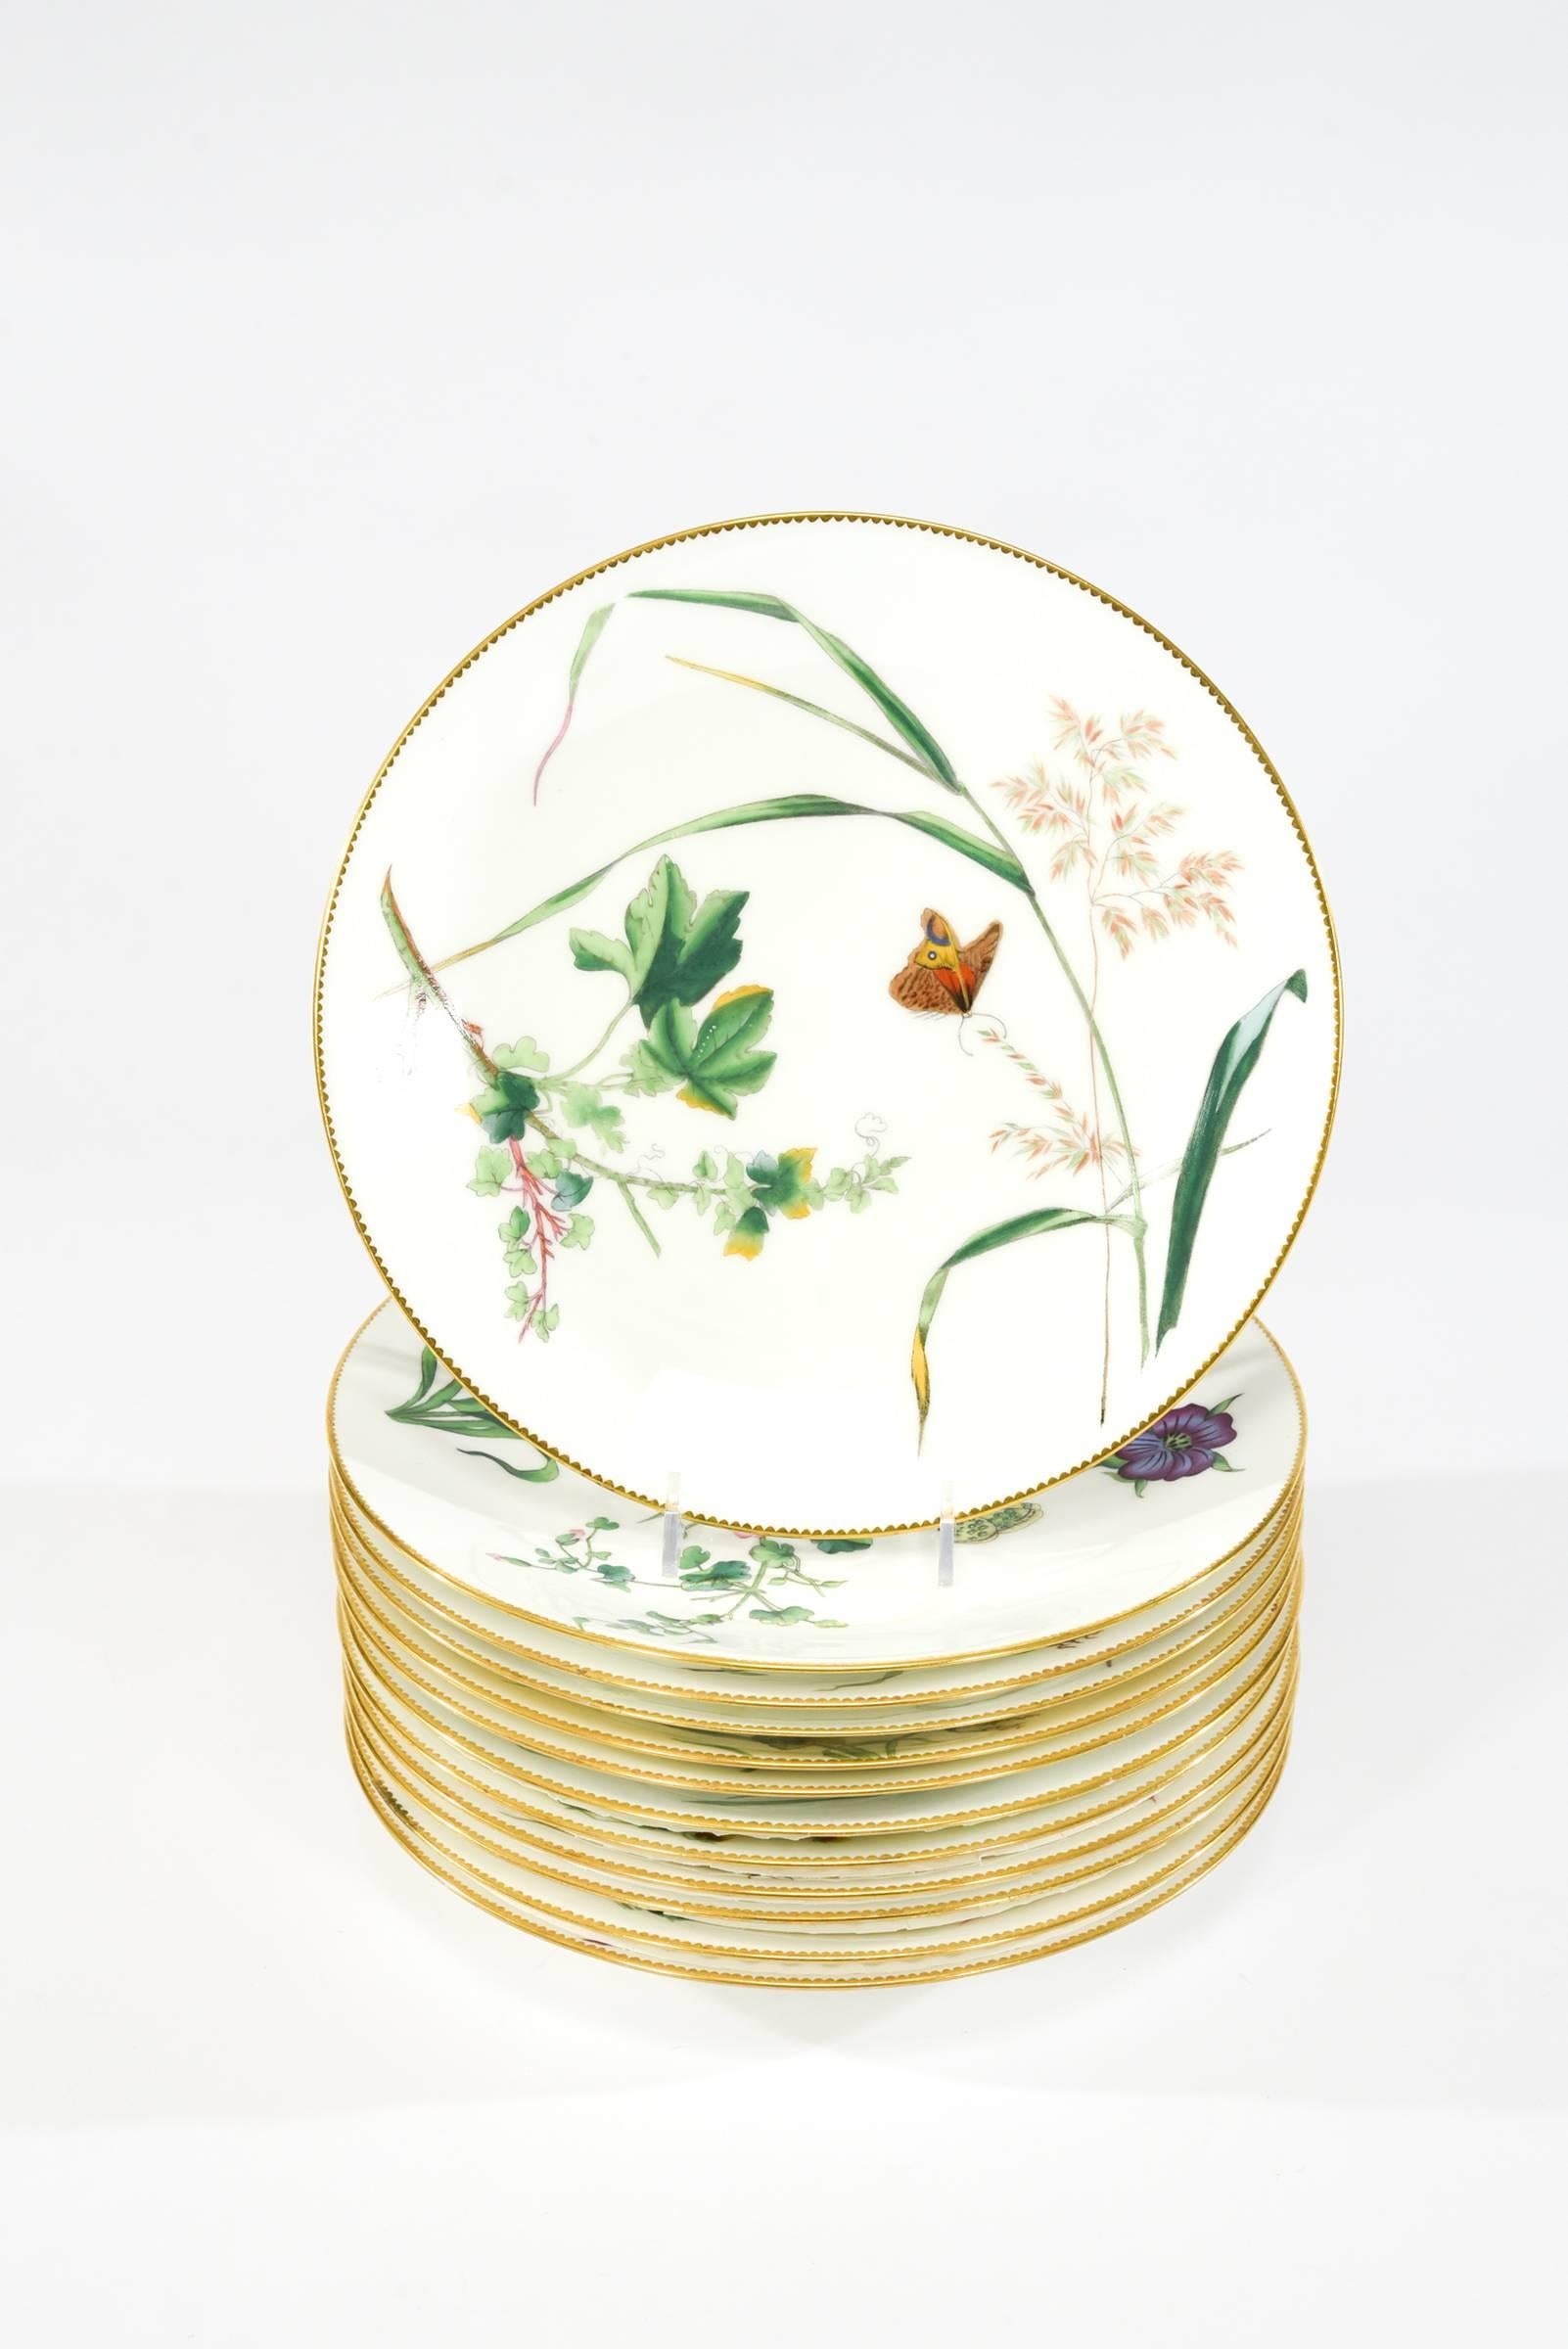 This set of 11 Minton hand painted dessert plates is a wonderful example of the artistry of the Aesthetic Movement. Dated 1881, these depict the combination of flowers and insects so sought after for both decoration and to set a special table- each